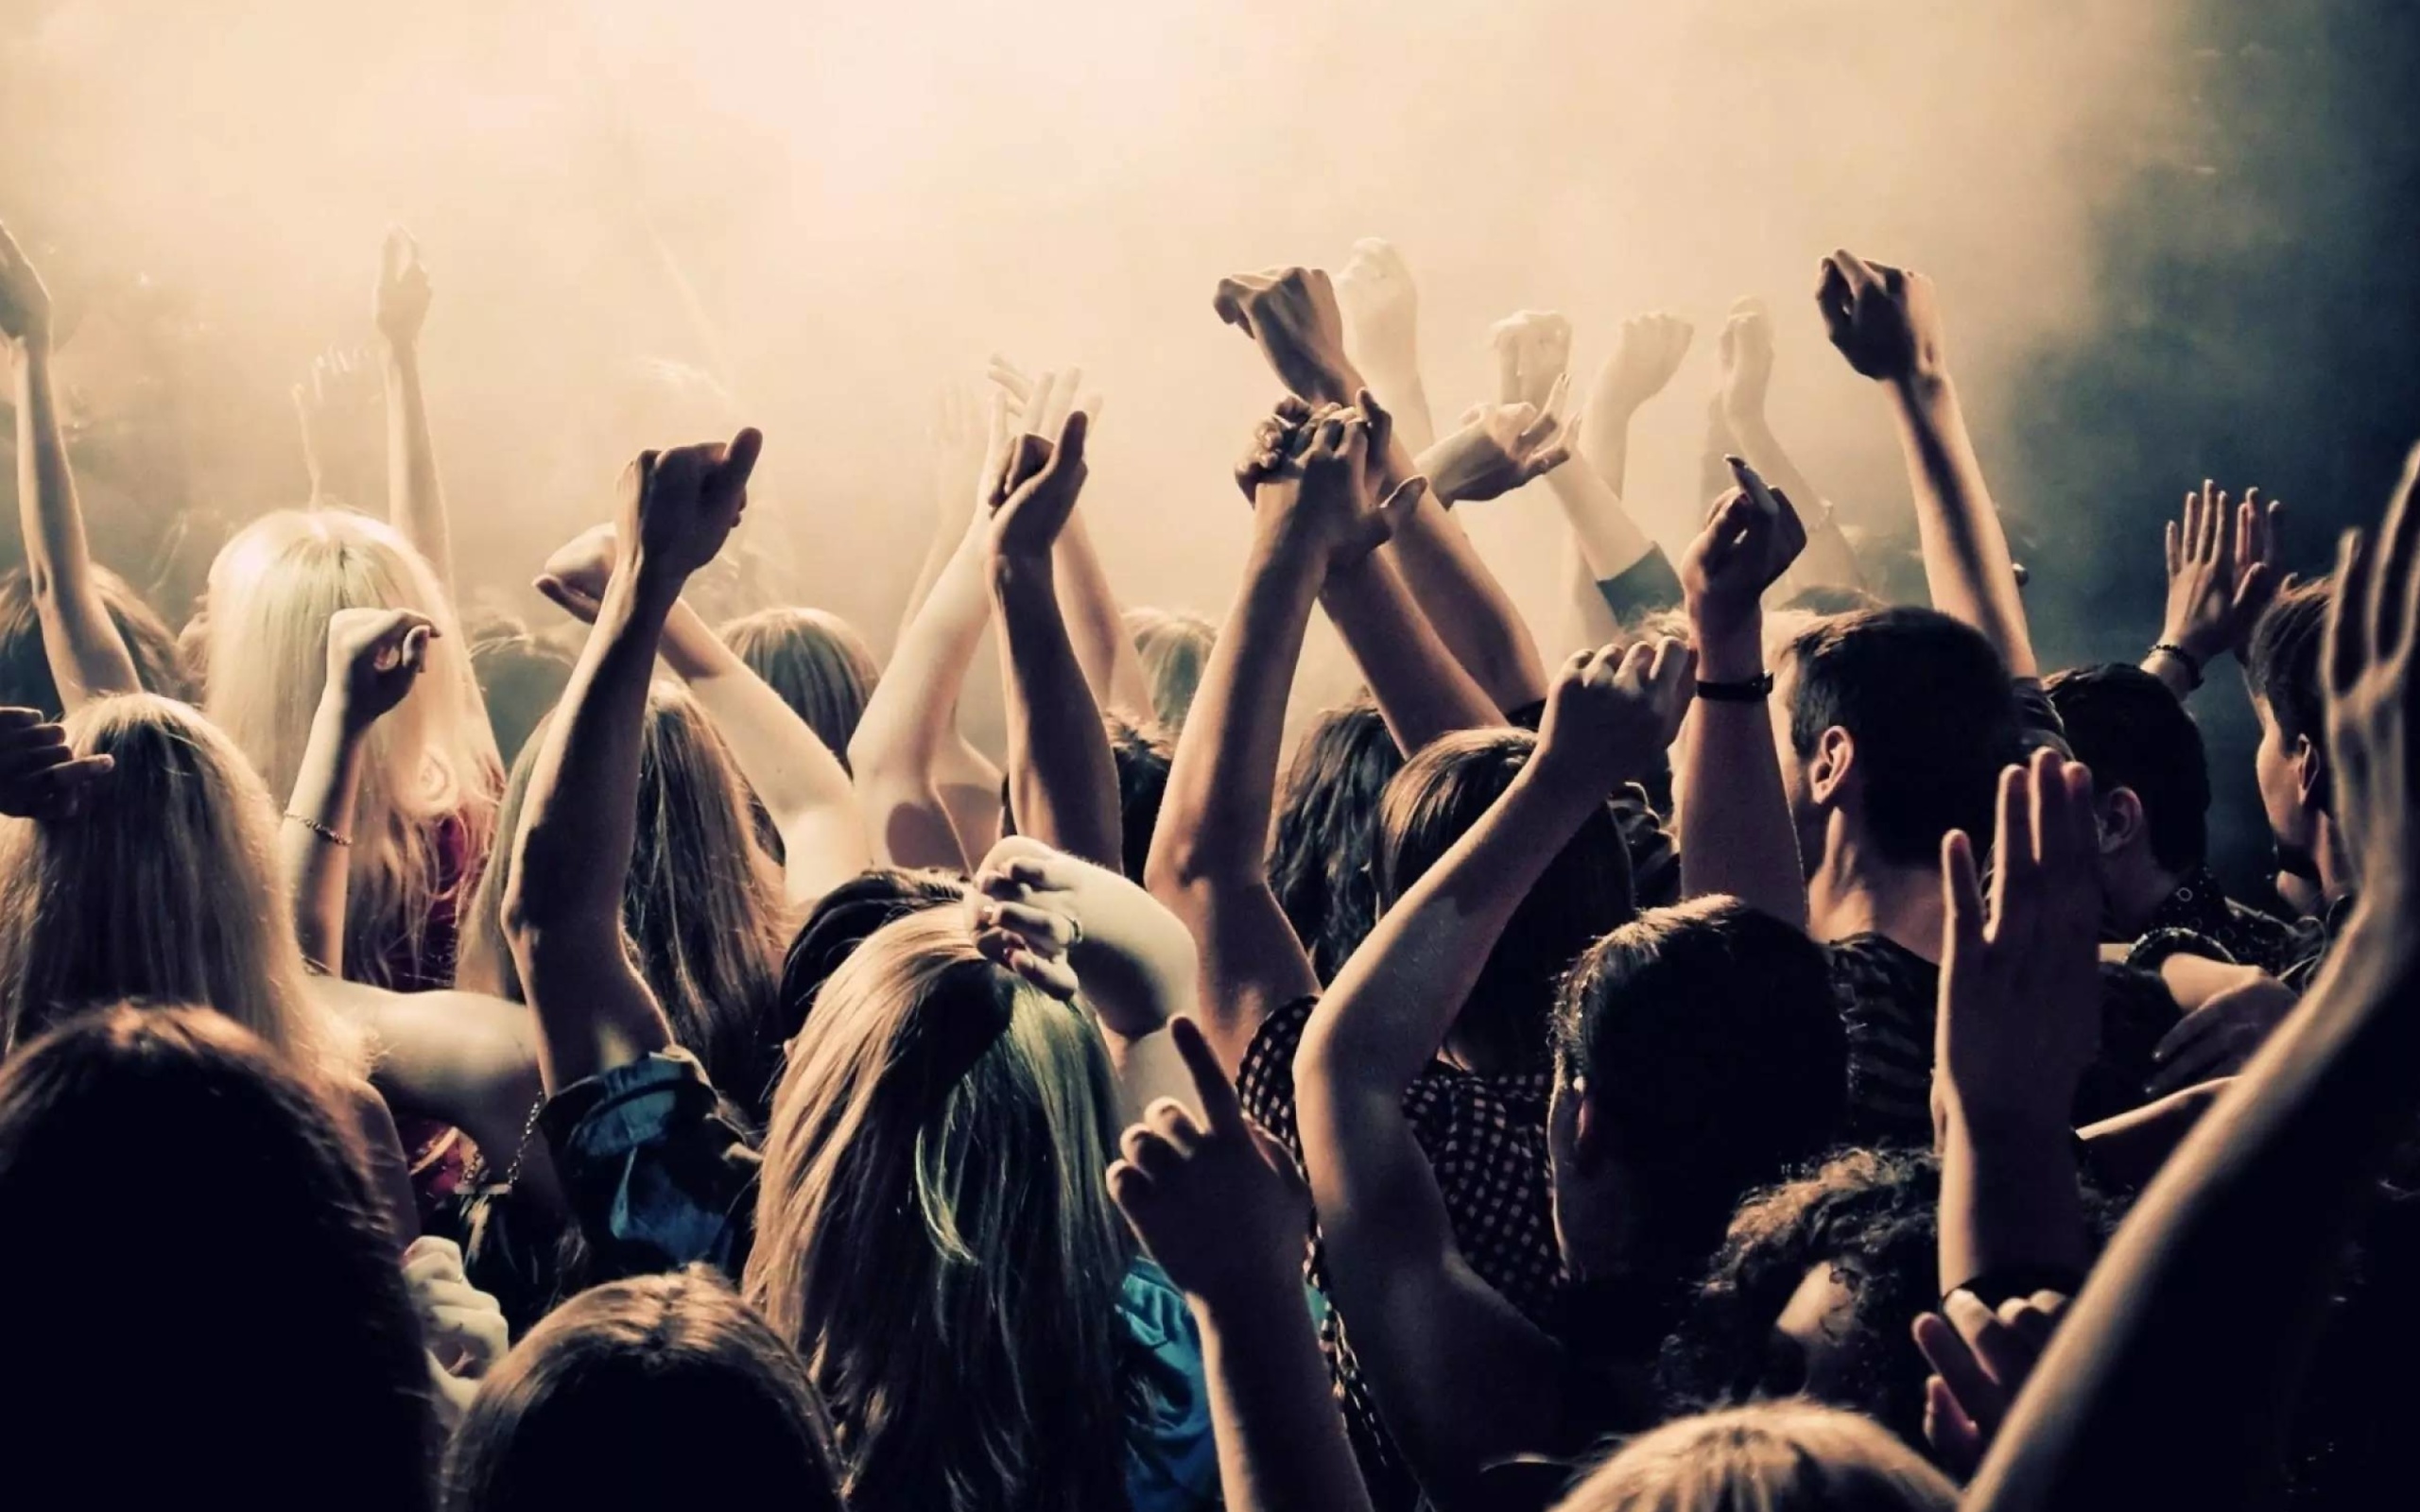 Crazy Party in Night Club, Put your hands up screenshot #1 2560x1600